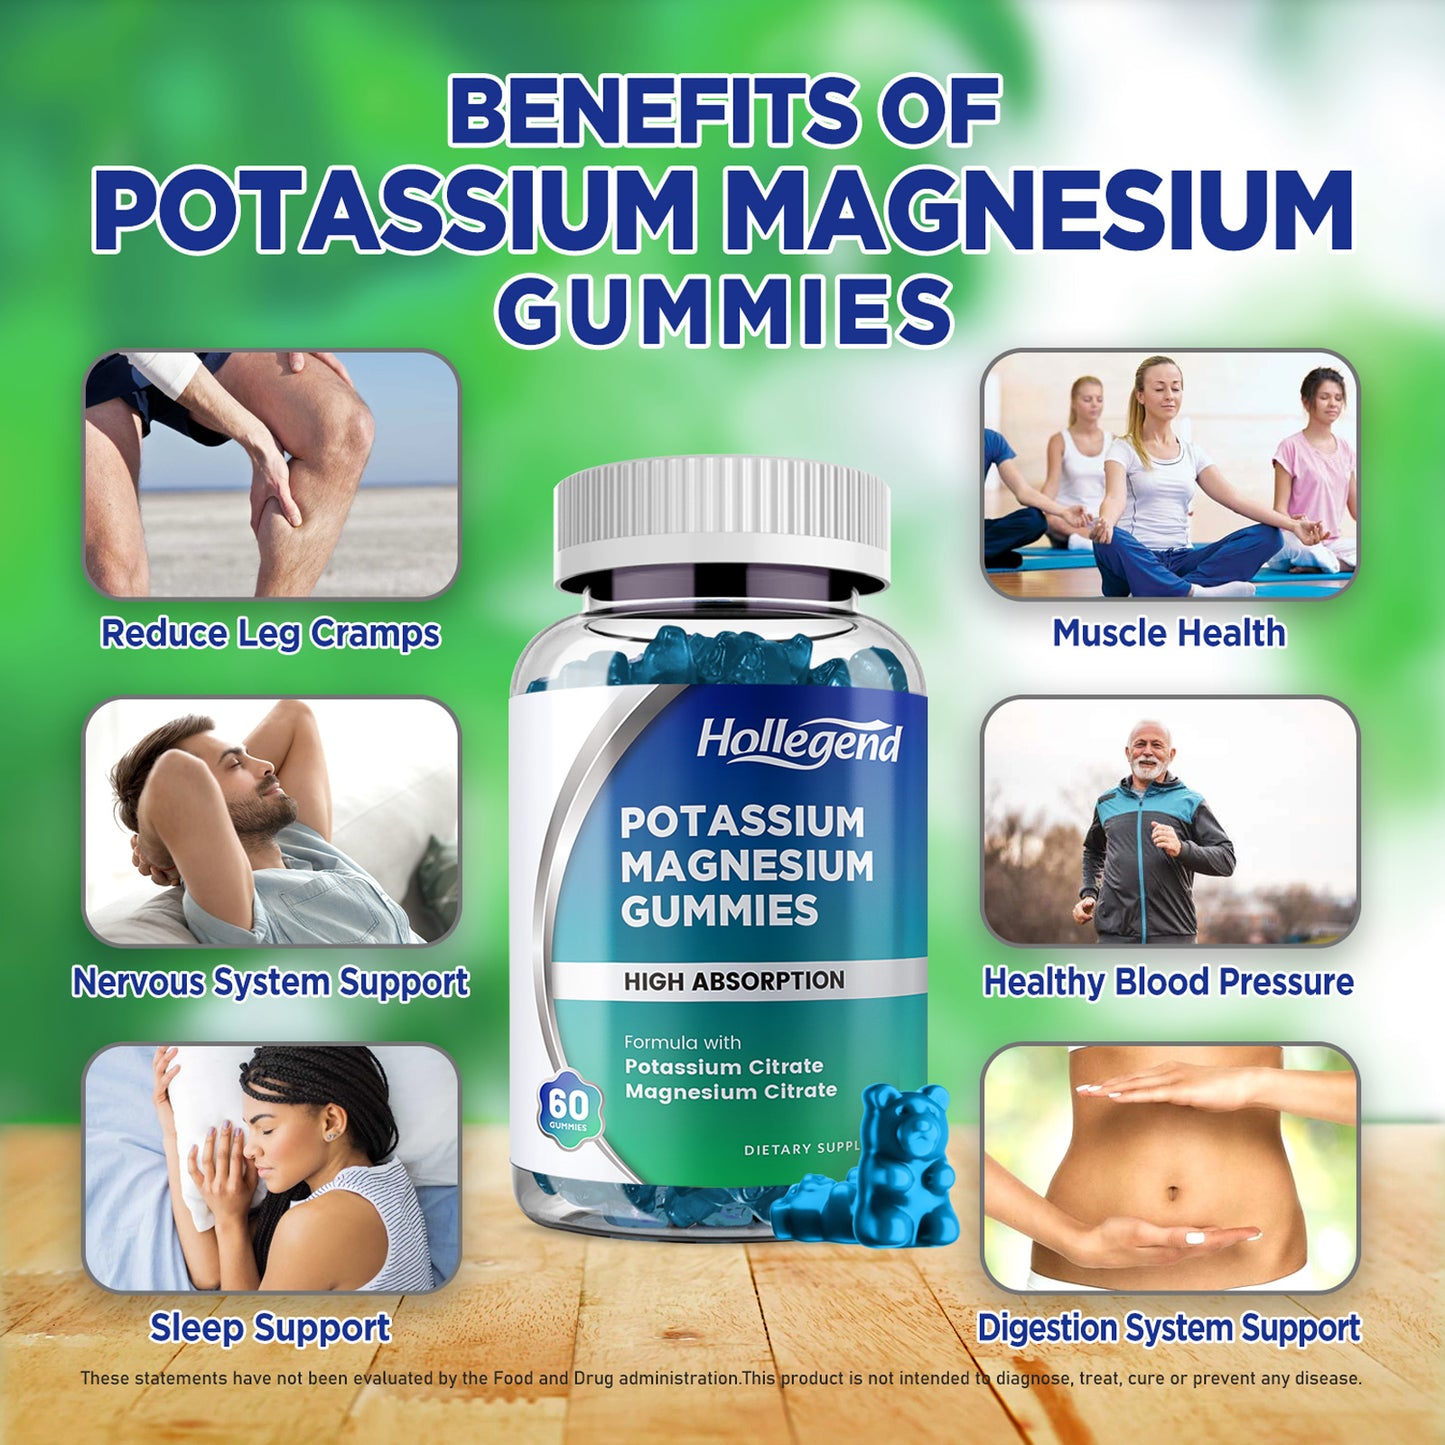 Potassium Magnesium Gummies, High Absorption Potassium Citrate 99mg Magnesium Citrate 180mg, Chewable Gummy Supplements for Leg Cramps & Muscle